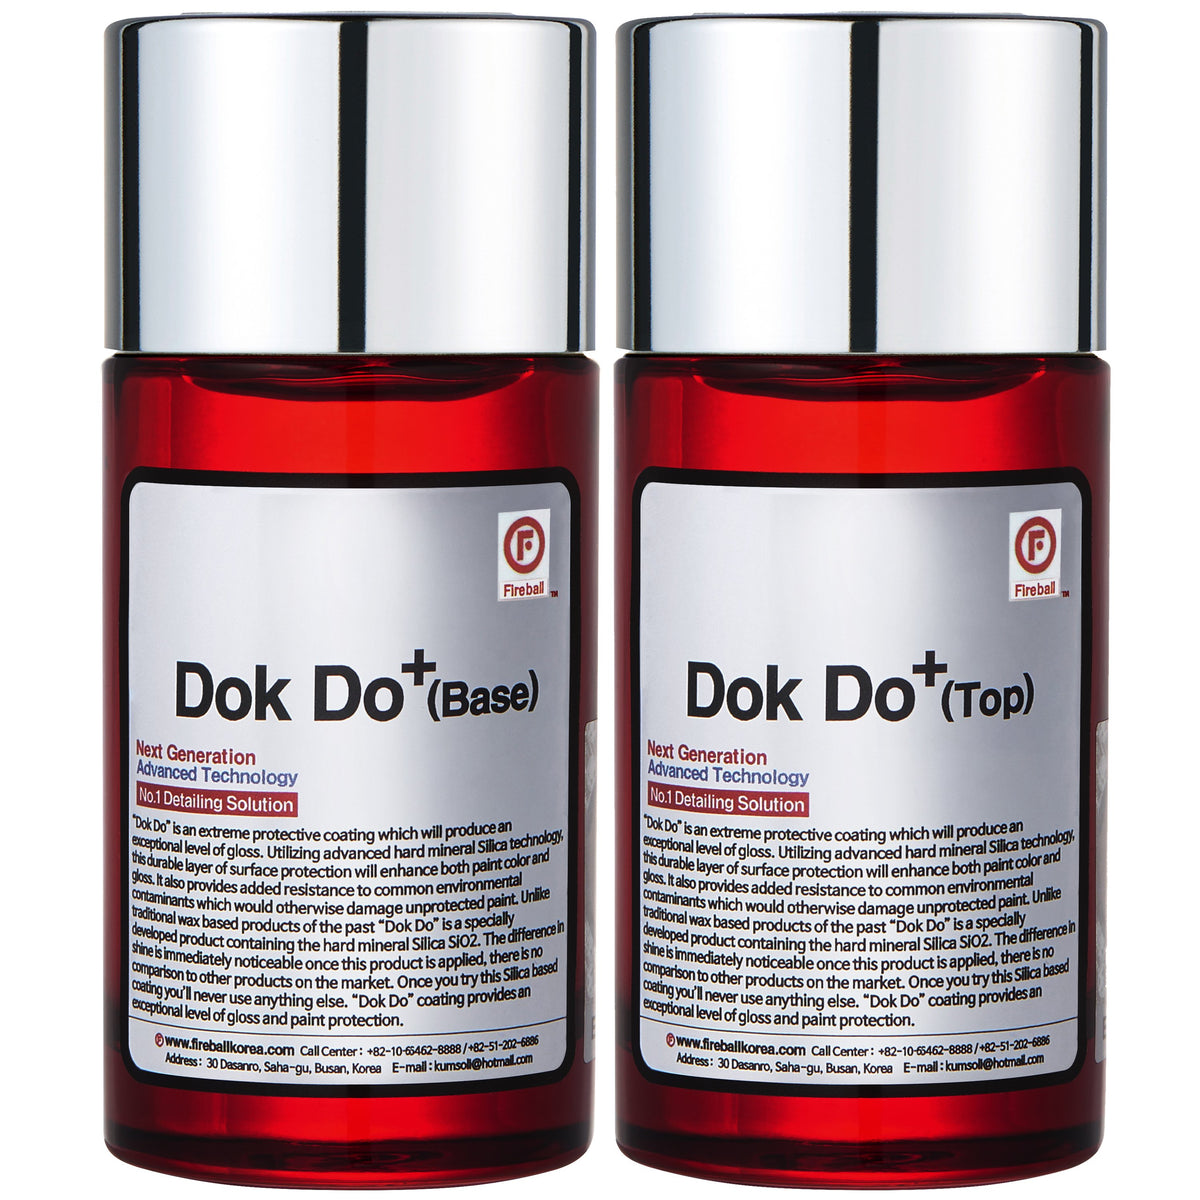 Fireball Dok Do+ 50mL Kit (Professional Authorized Only, contact us for access)